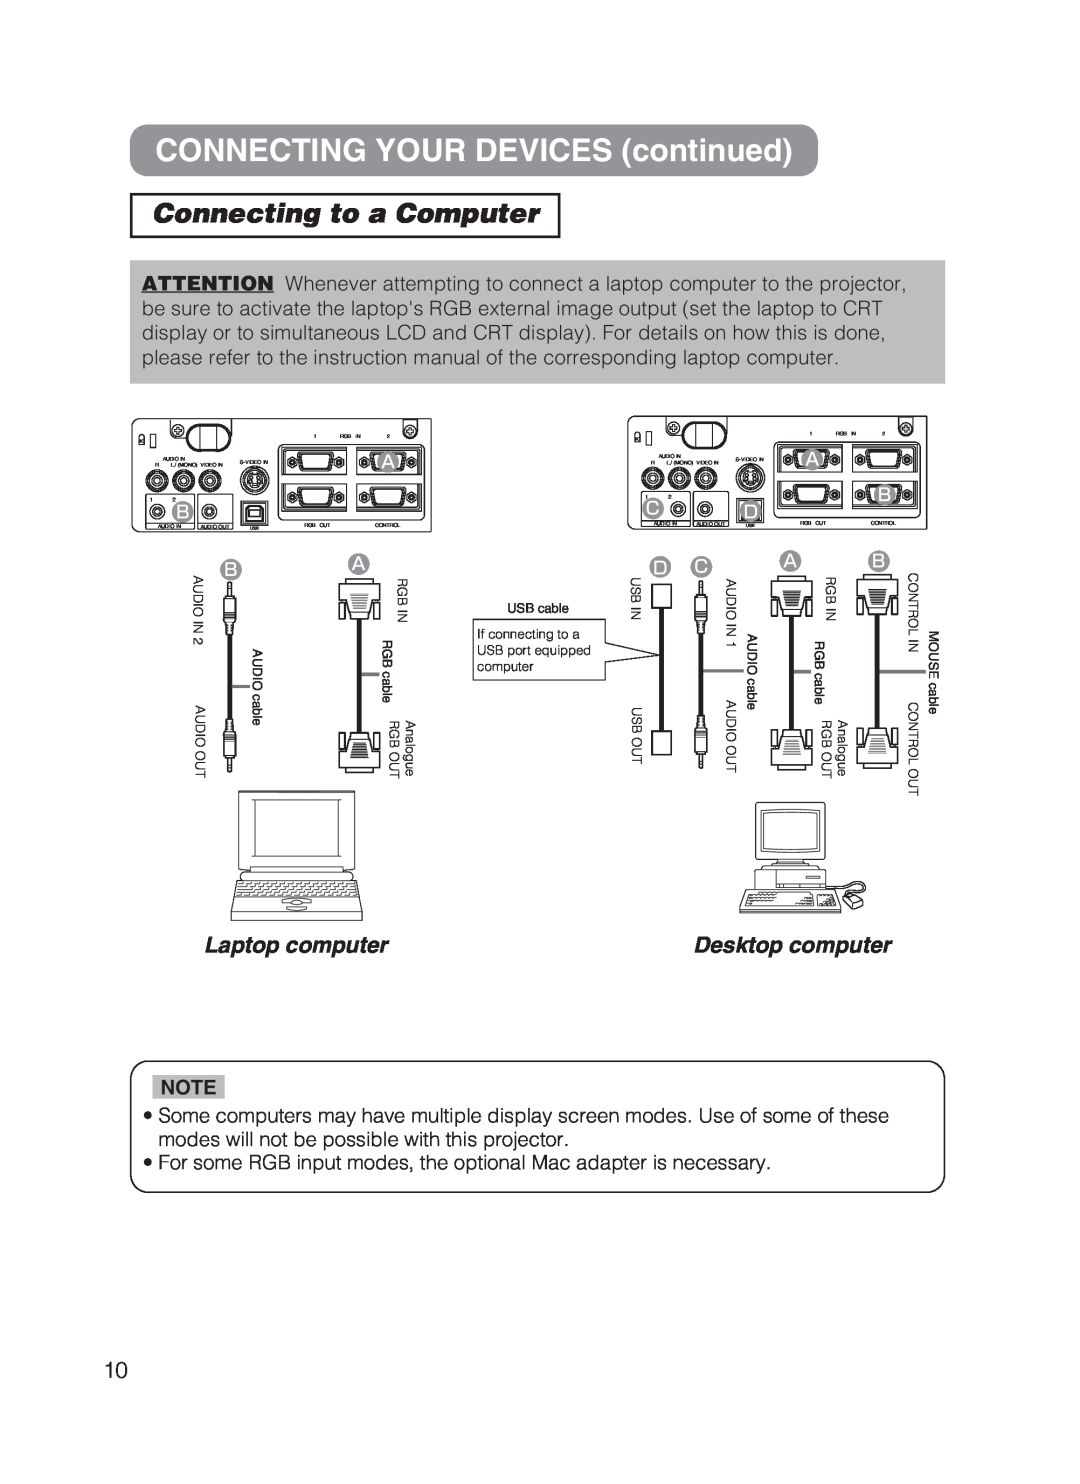 Dukane 8755B user manual CONNECTING YOUR DEVICES continued, Connecting to a Computer, Laptop computer, Desktop computer 